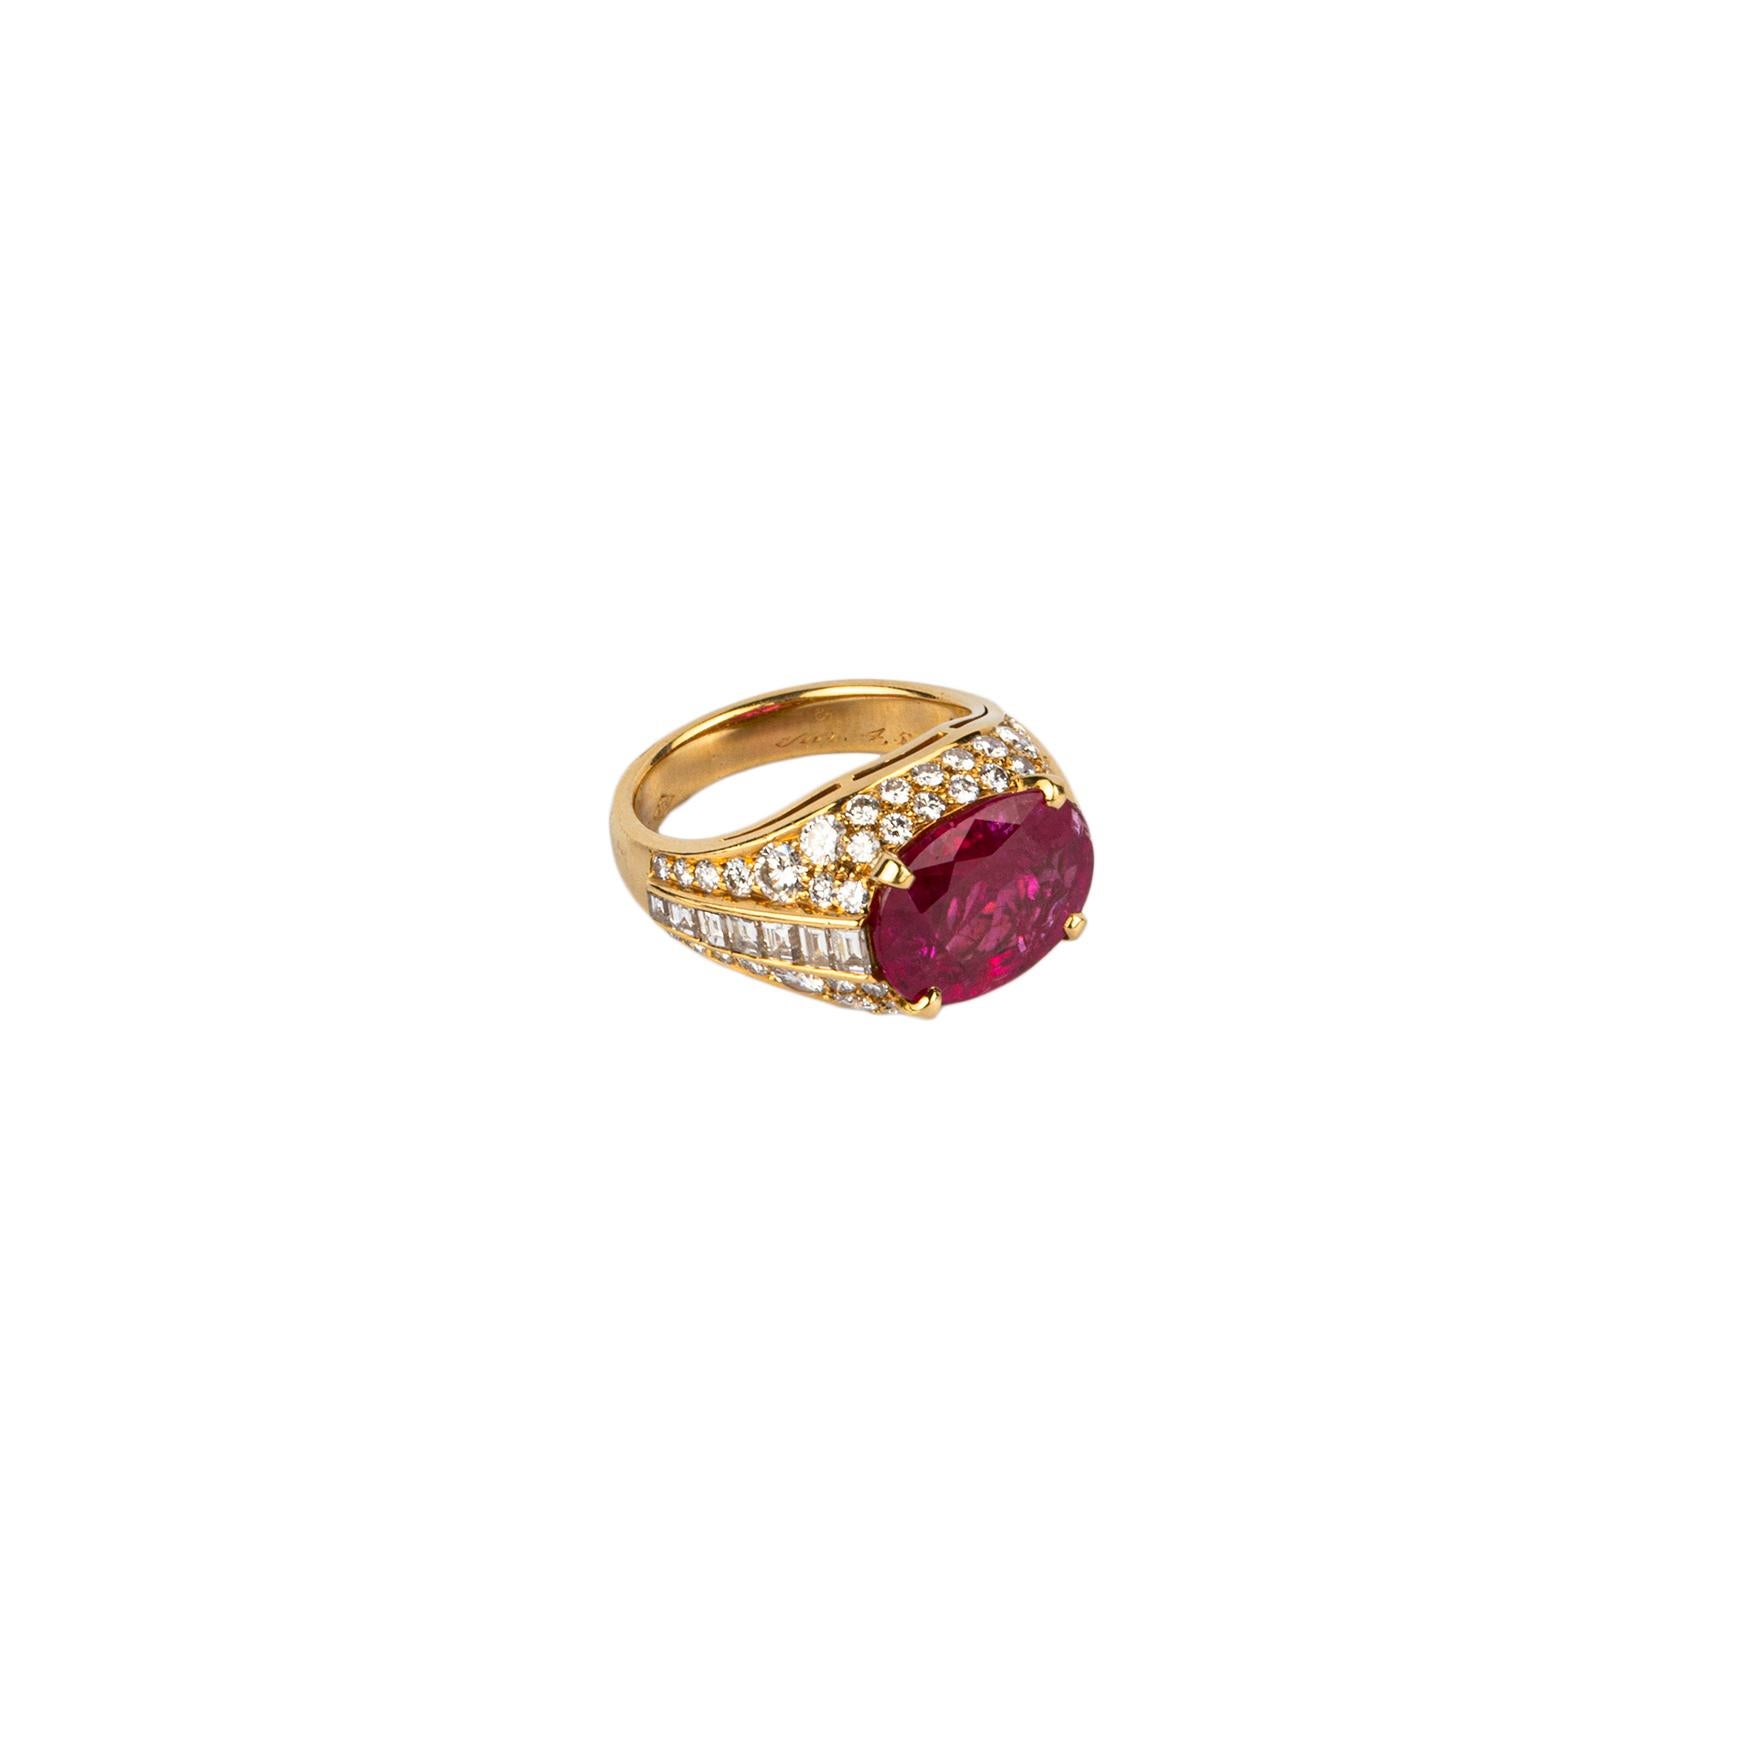 Important Bulgari Trombino ring with a Burma ruby weighing 4.51 carats and further embellished by Diamonds on the shoulders. The ring is accompanied by a AGL Burma no-heat natural stone certificate. Made in Italy, circa 1980.